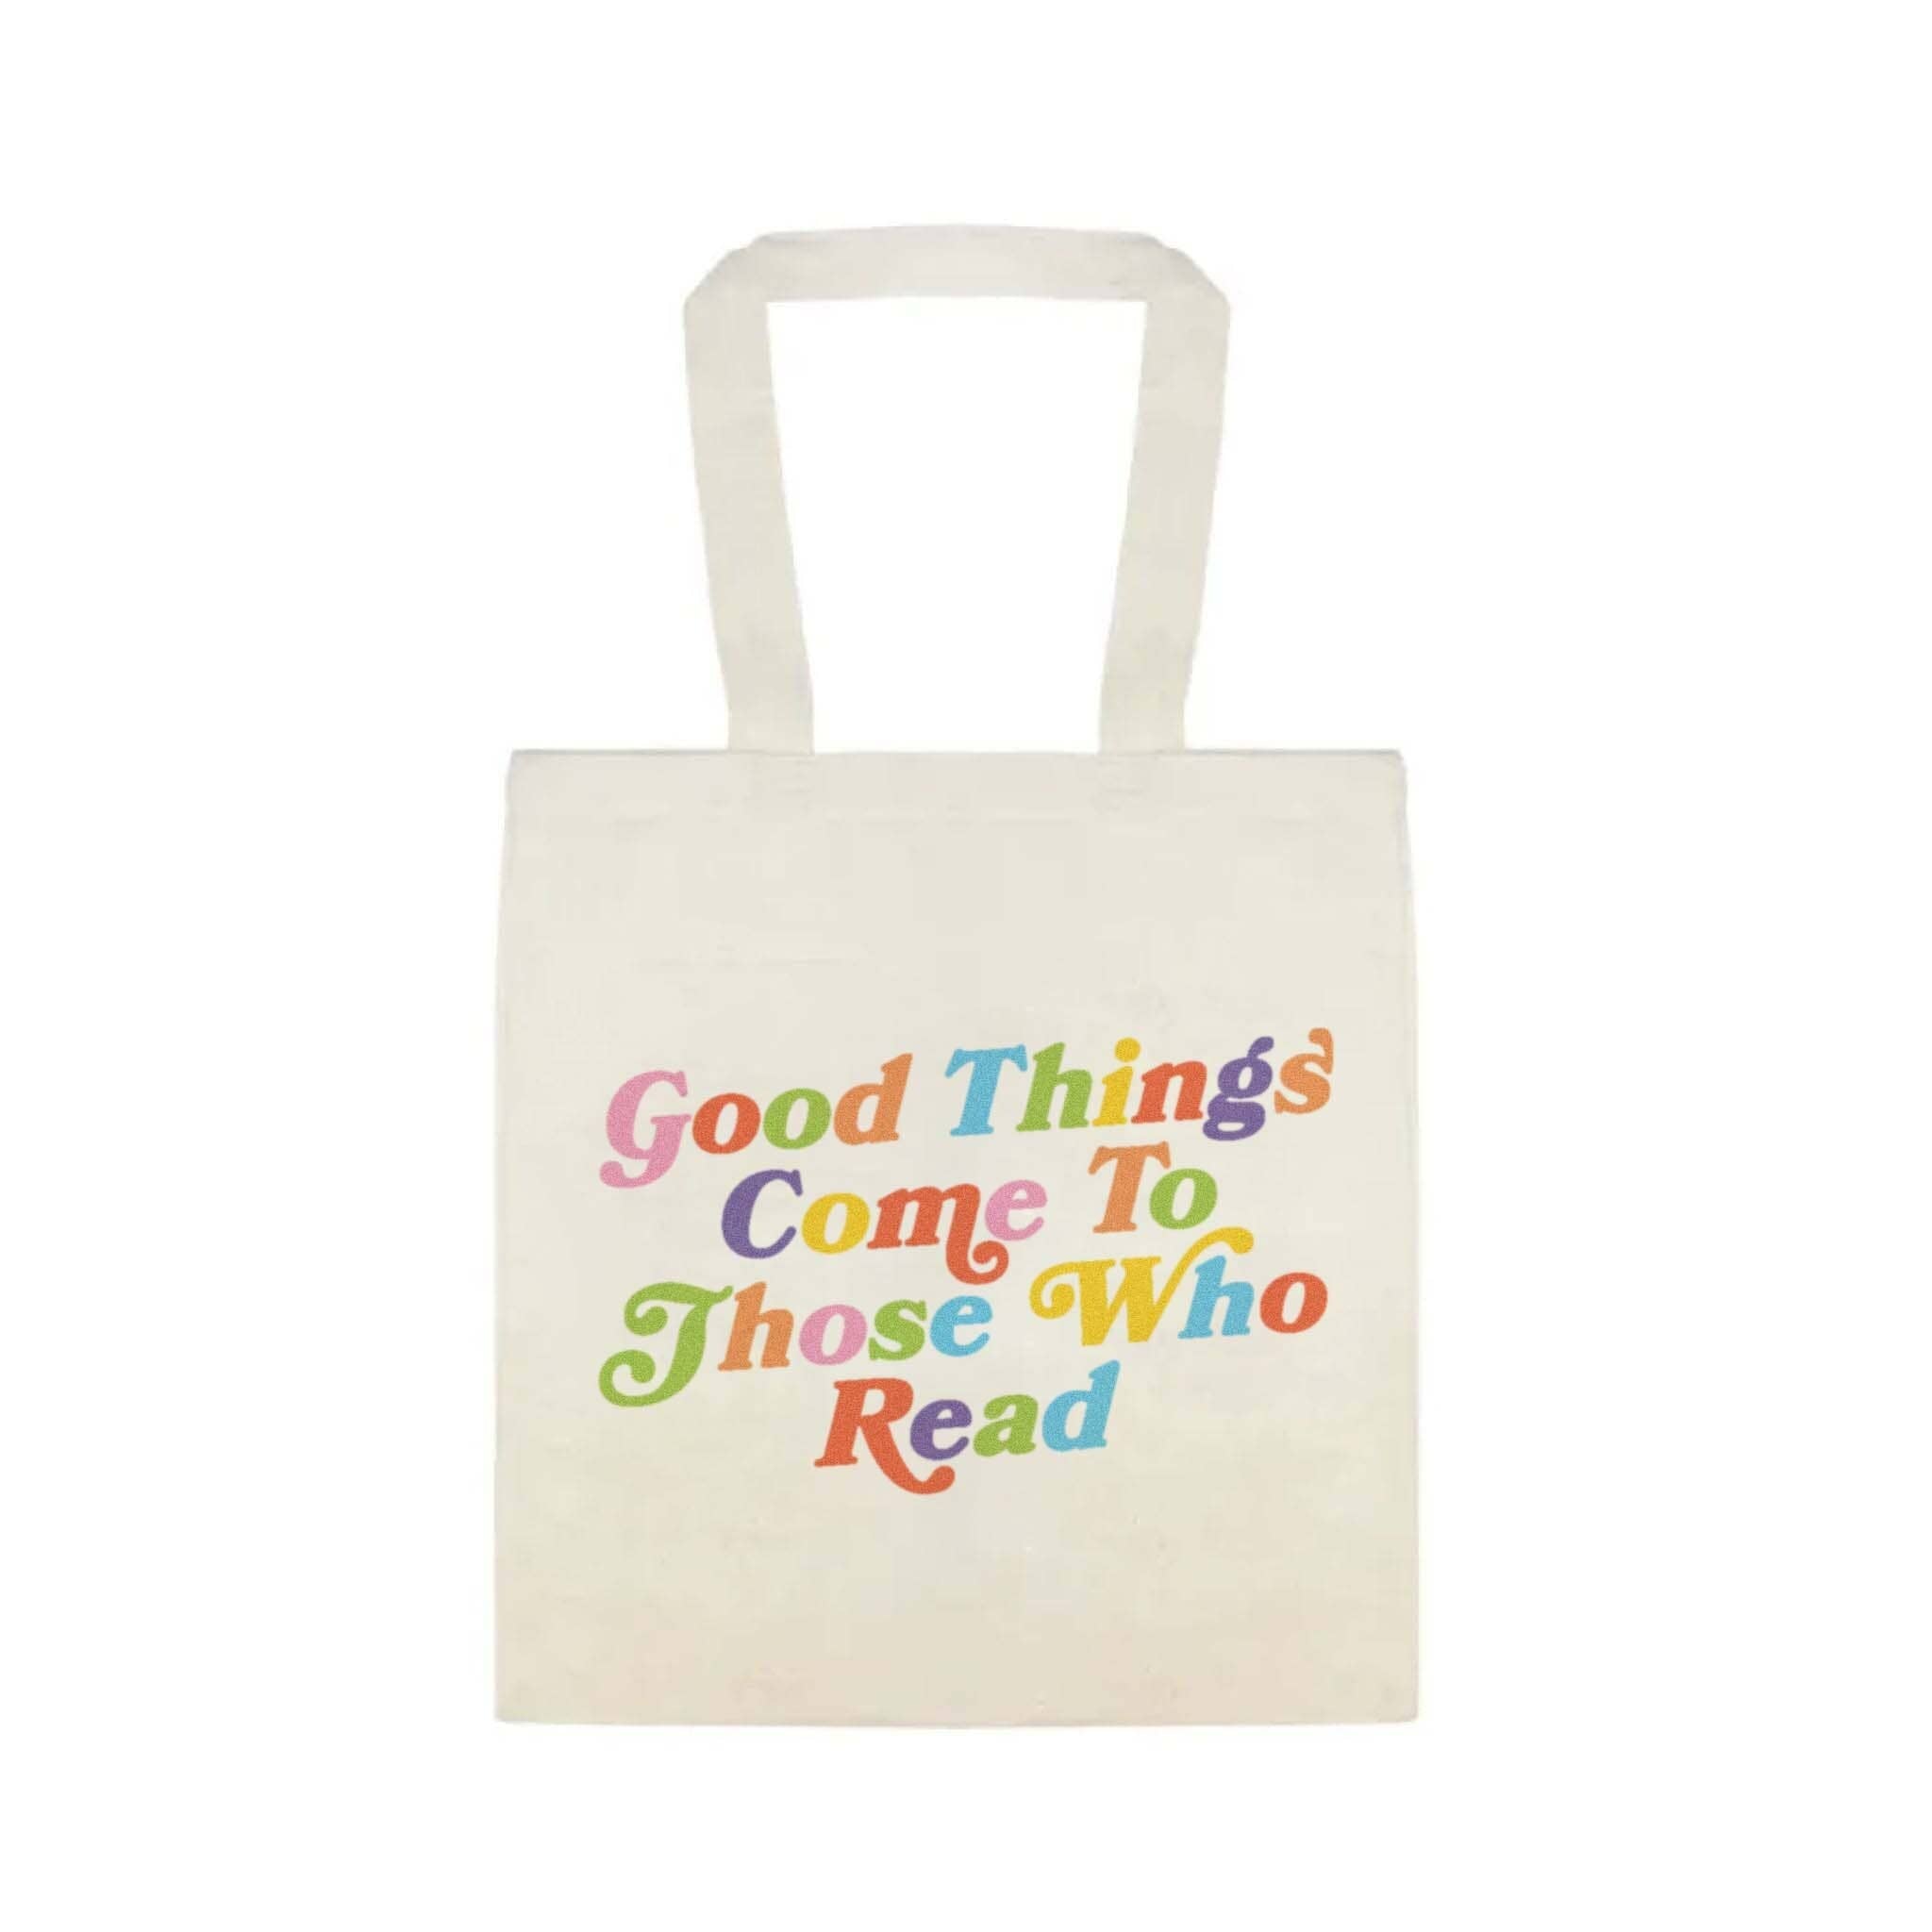 Good Things Come To Those Who Read - Tote Bag